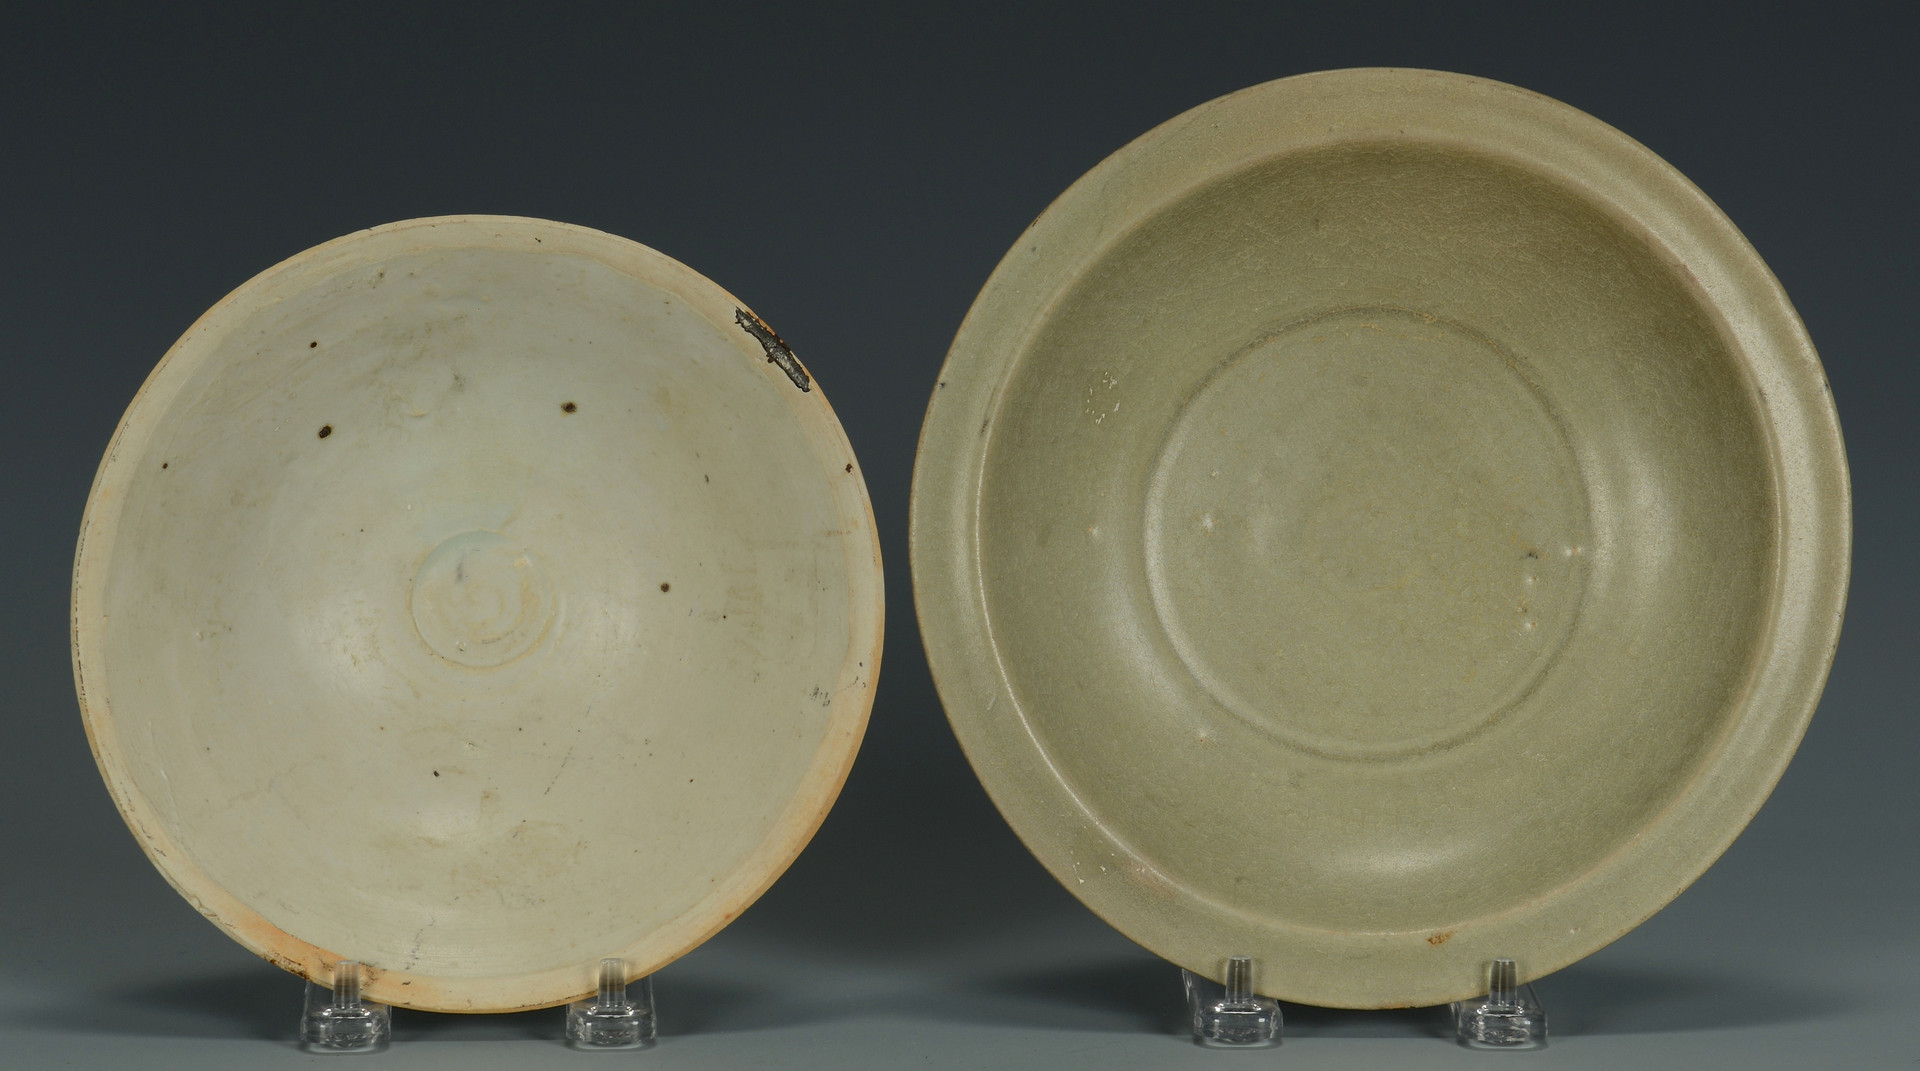 Lot 13: Chinese Sung & Ming Dynasty Bowls